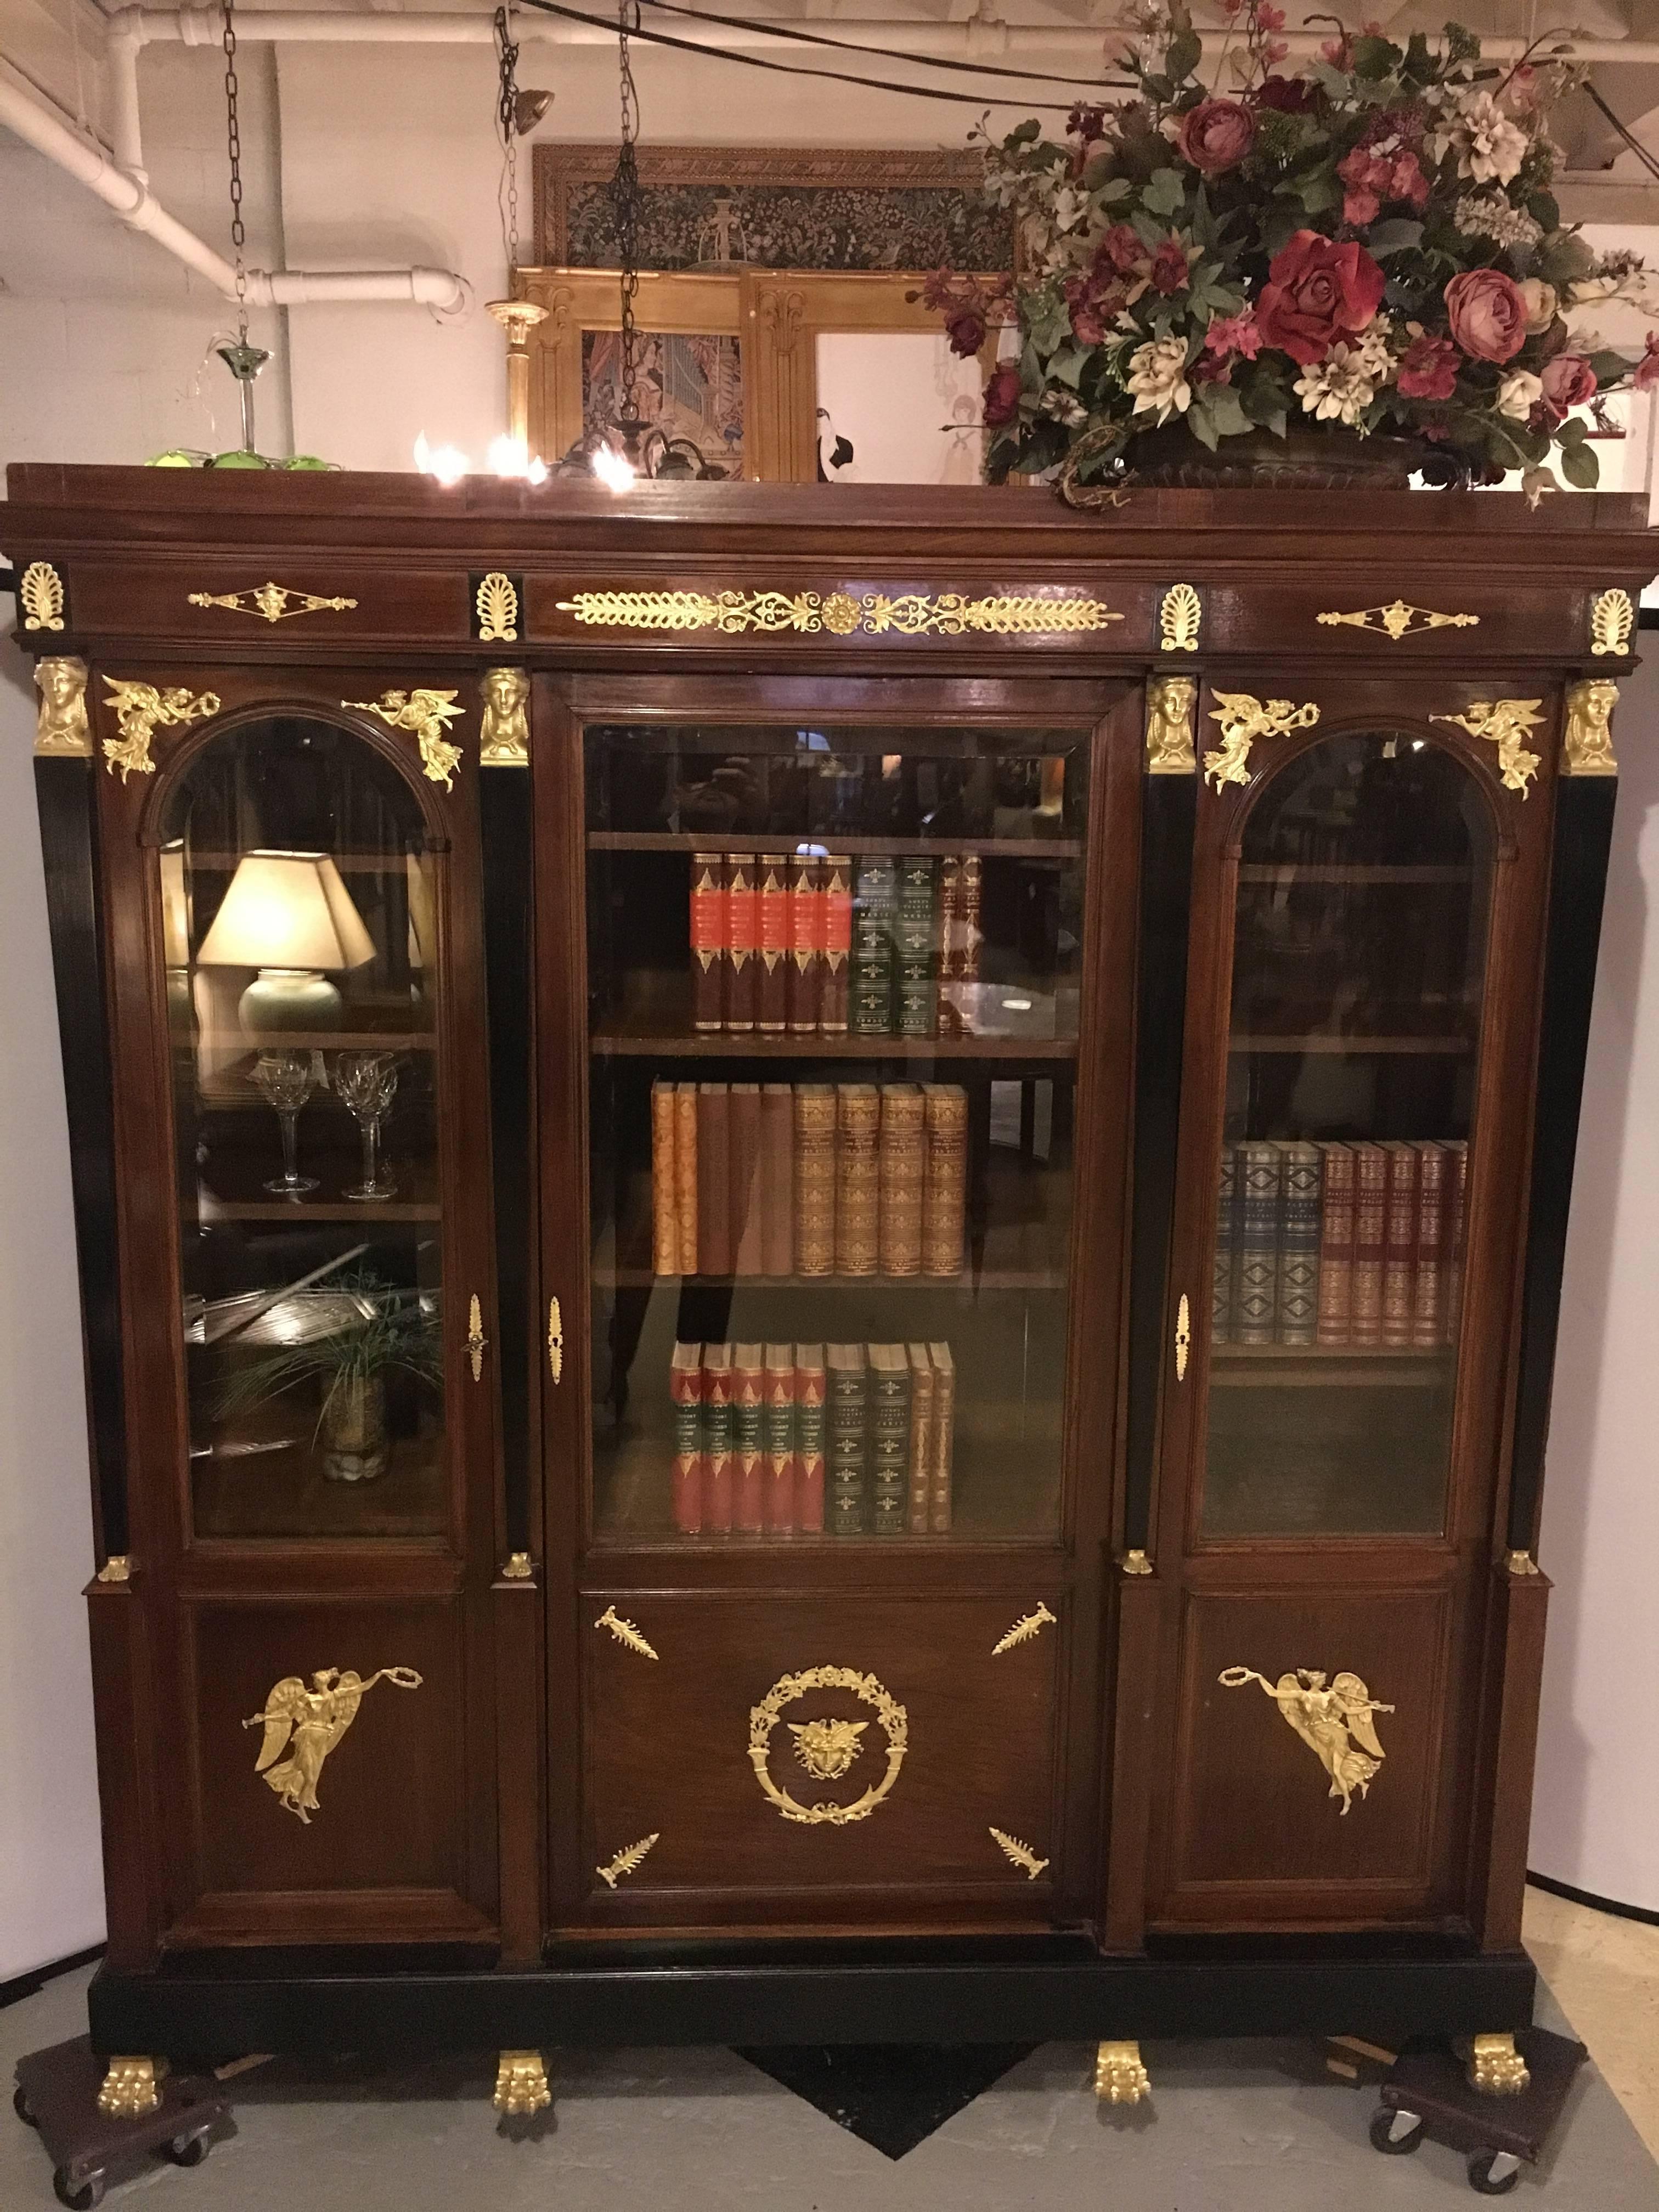 19th century Empire crotch mahogany doré bronze-mounted bookcase breakfront. Sitting on bronze claw feet stands this large and impressive antique bookcase. The over the top bronze mounts of the finest quality in doré'. Having a centre door of